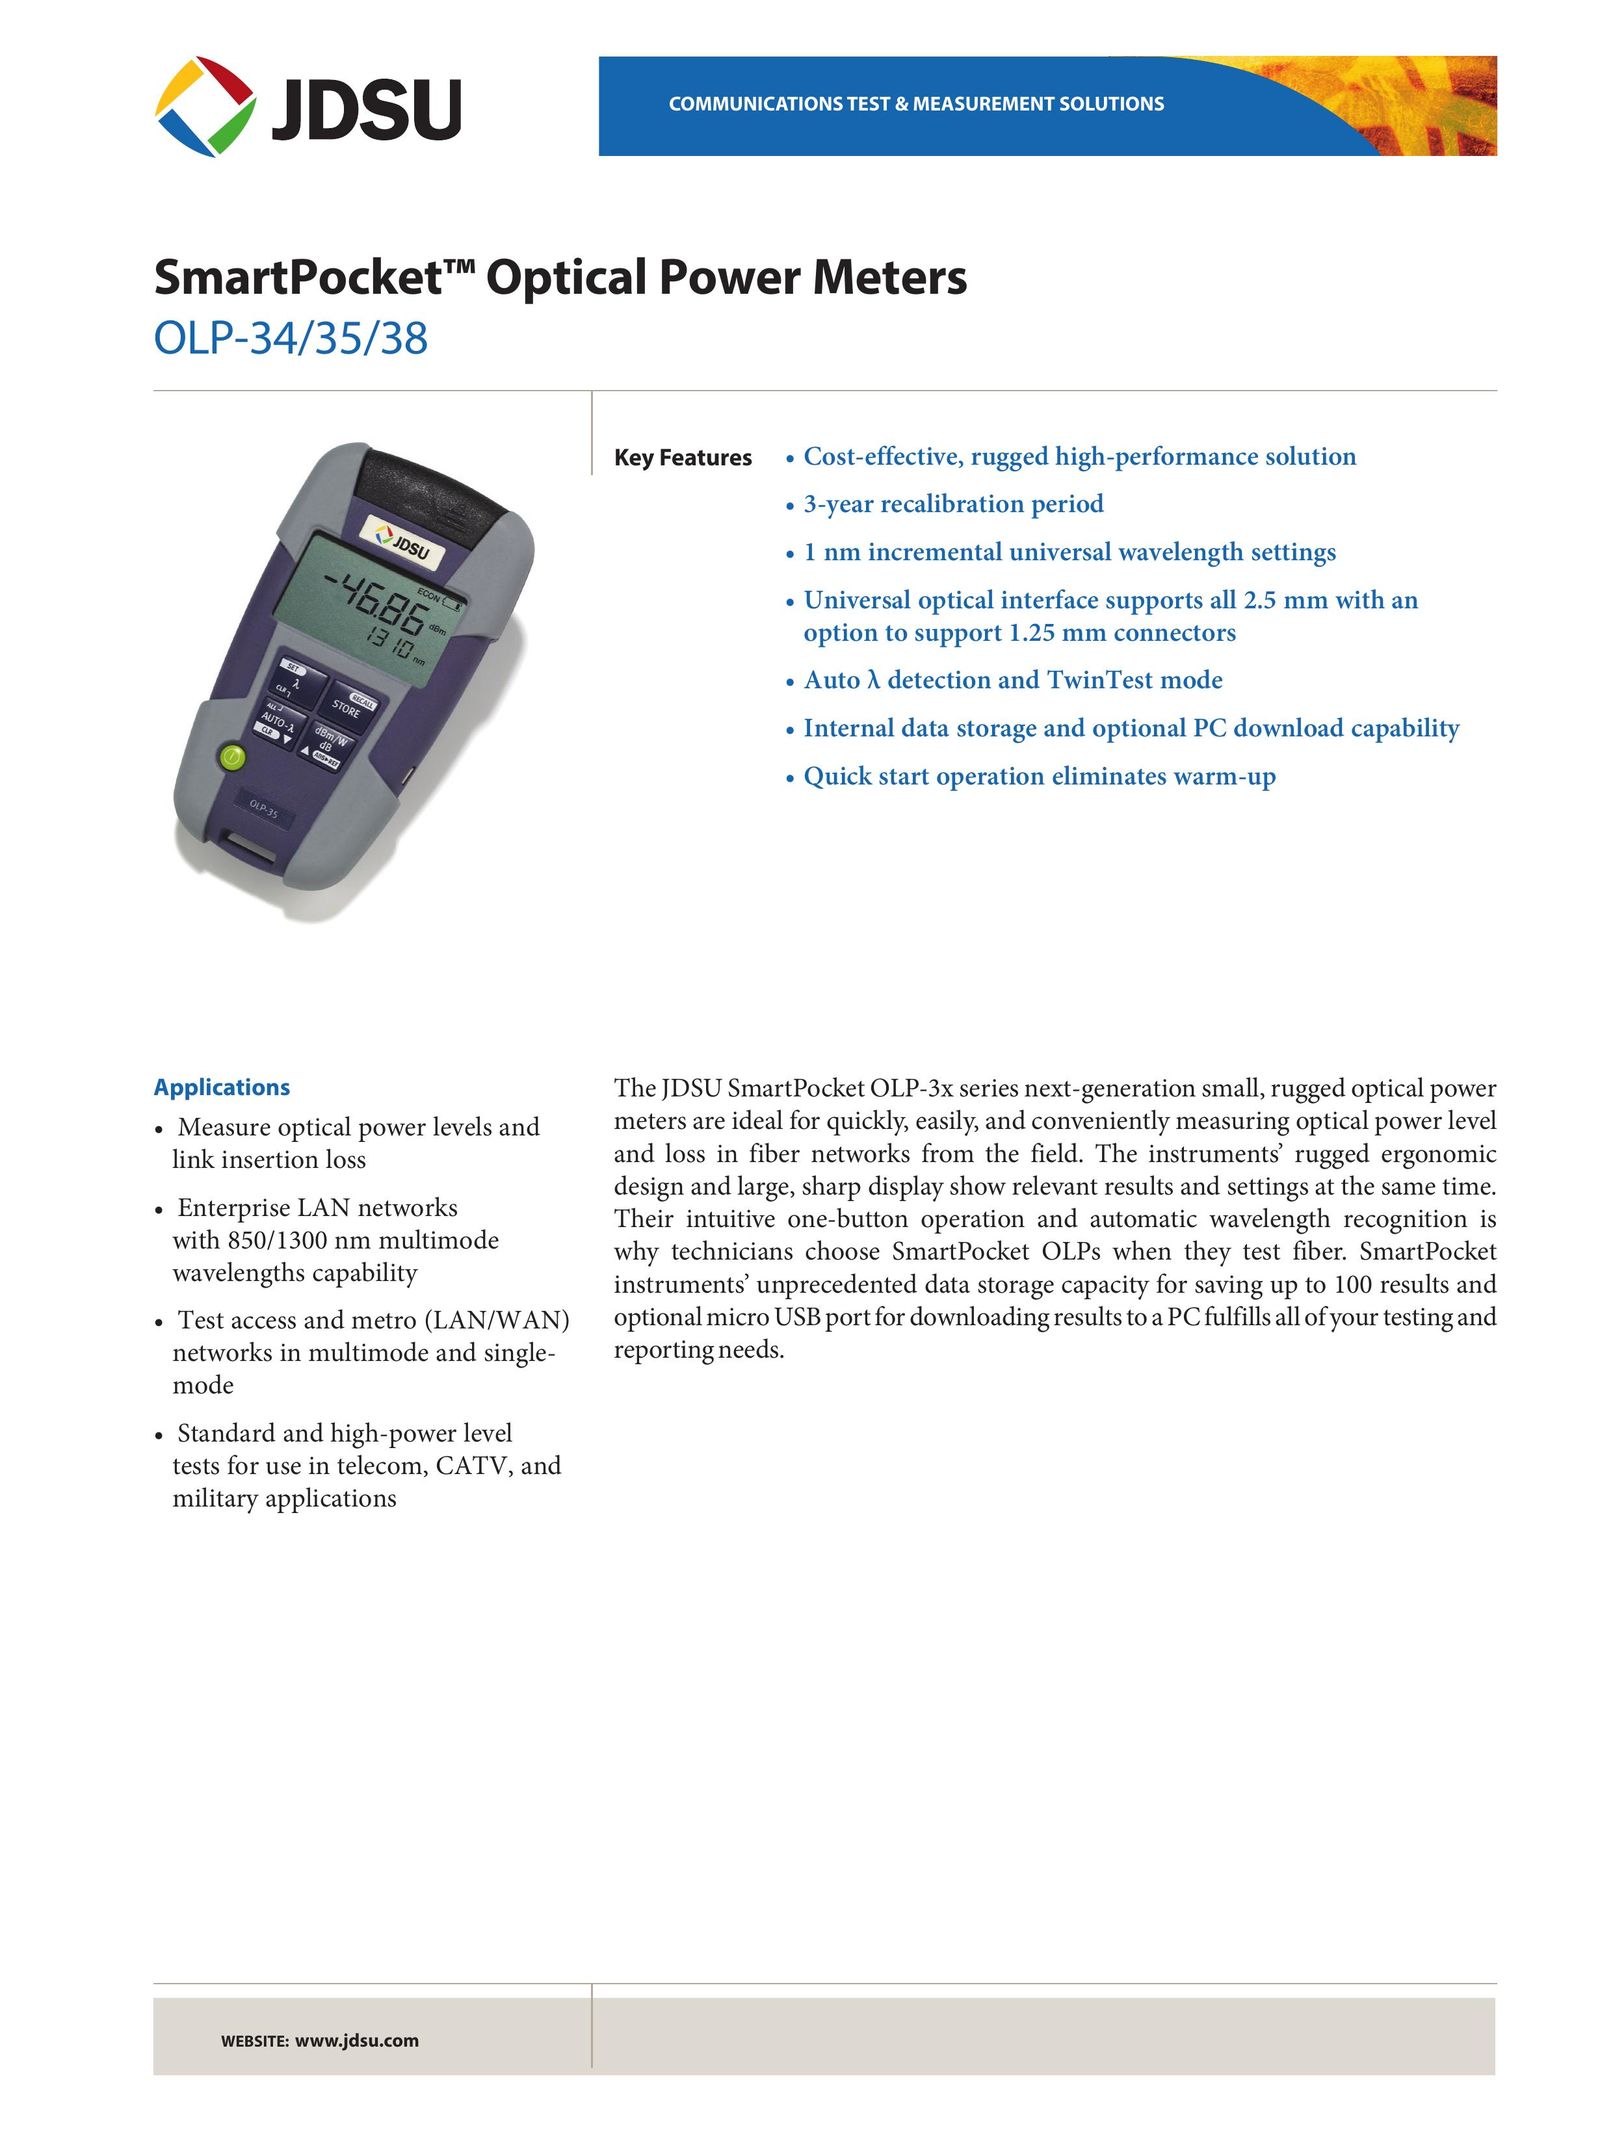 JDS Uniphase OLP-35 Electronic Accessory User Manual